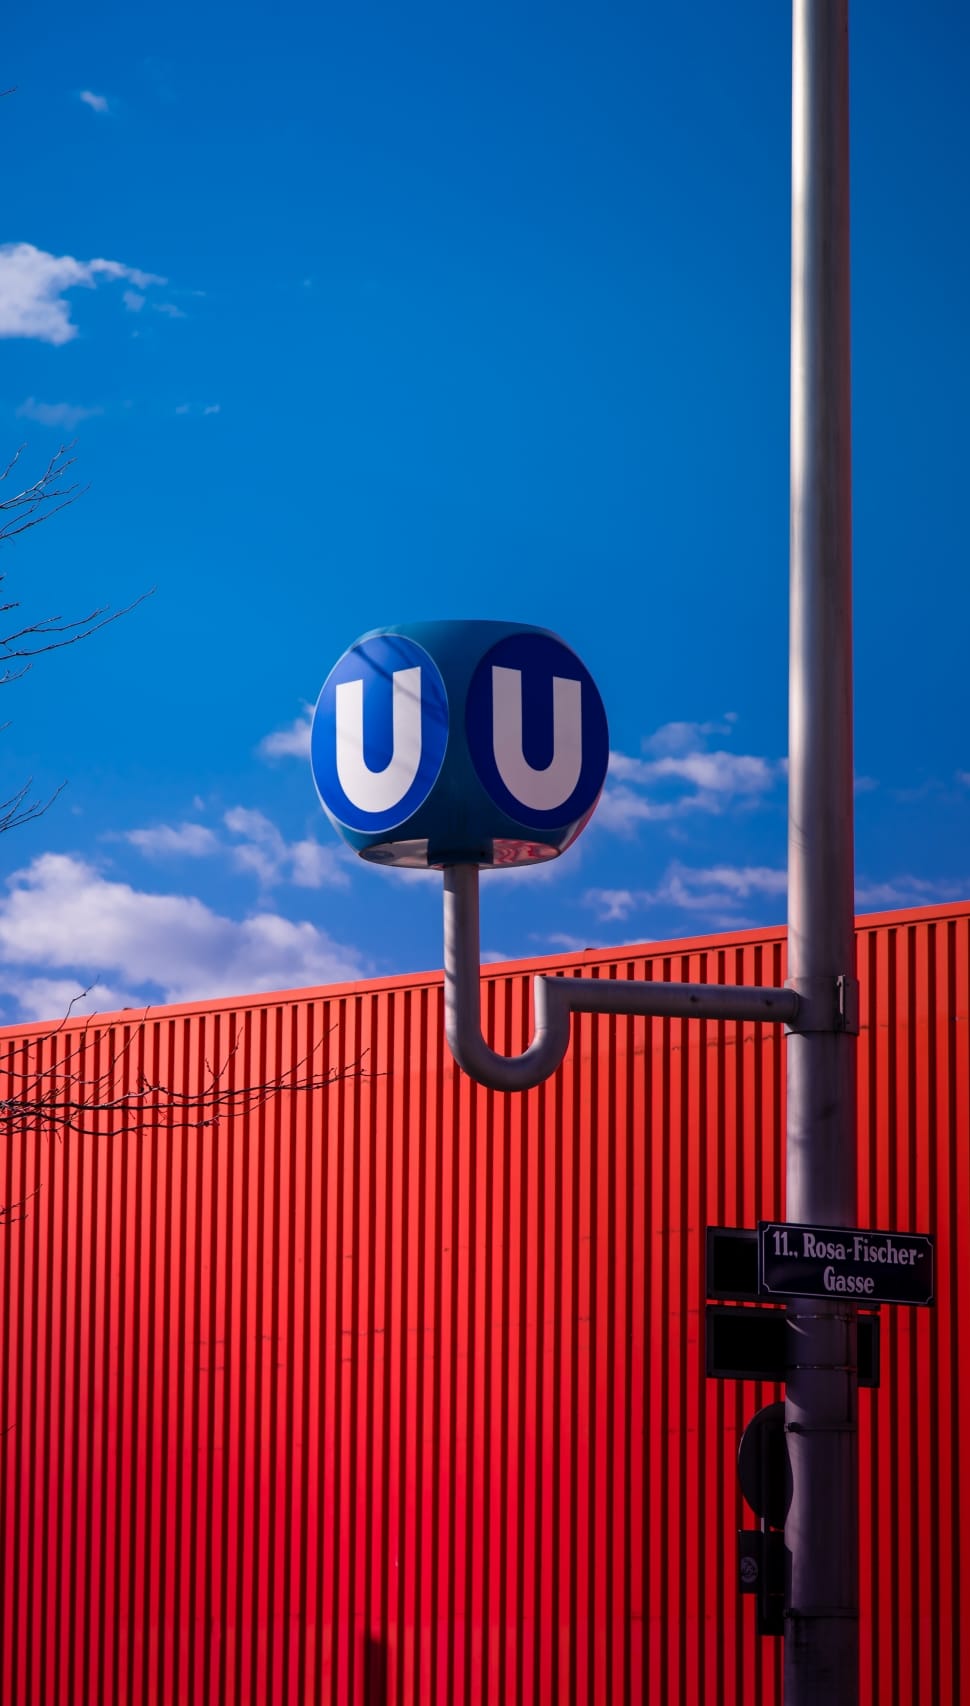 blue uu post signage preview